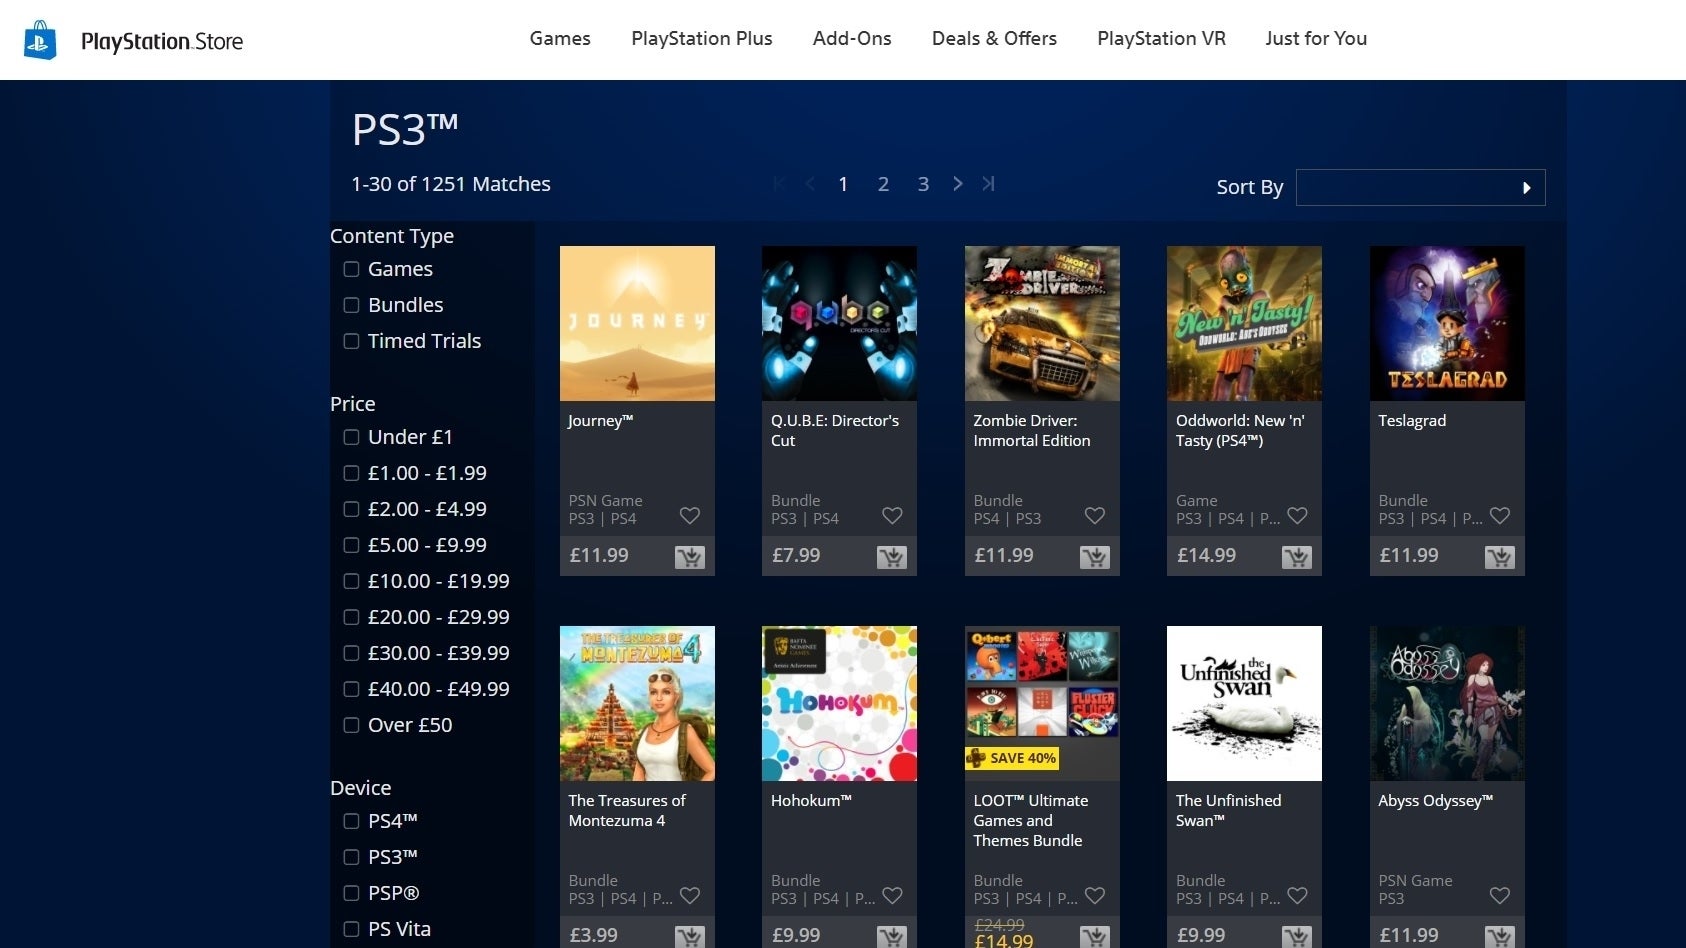 PlayStation Store on web and mobile to stop selling PS3, PSP